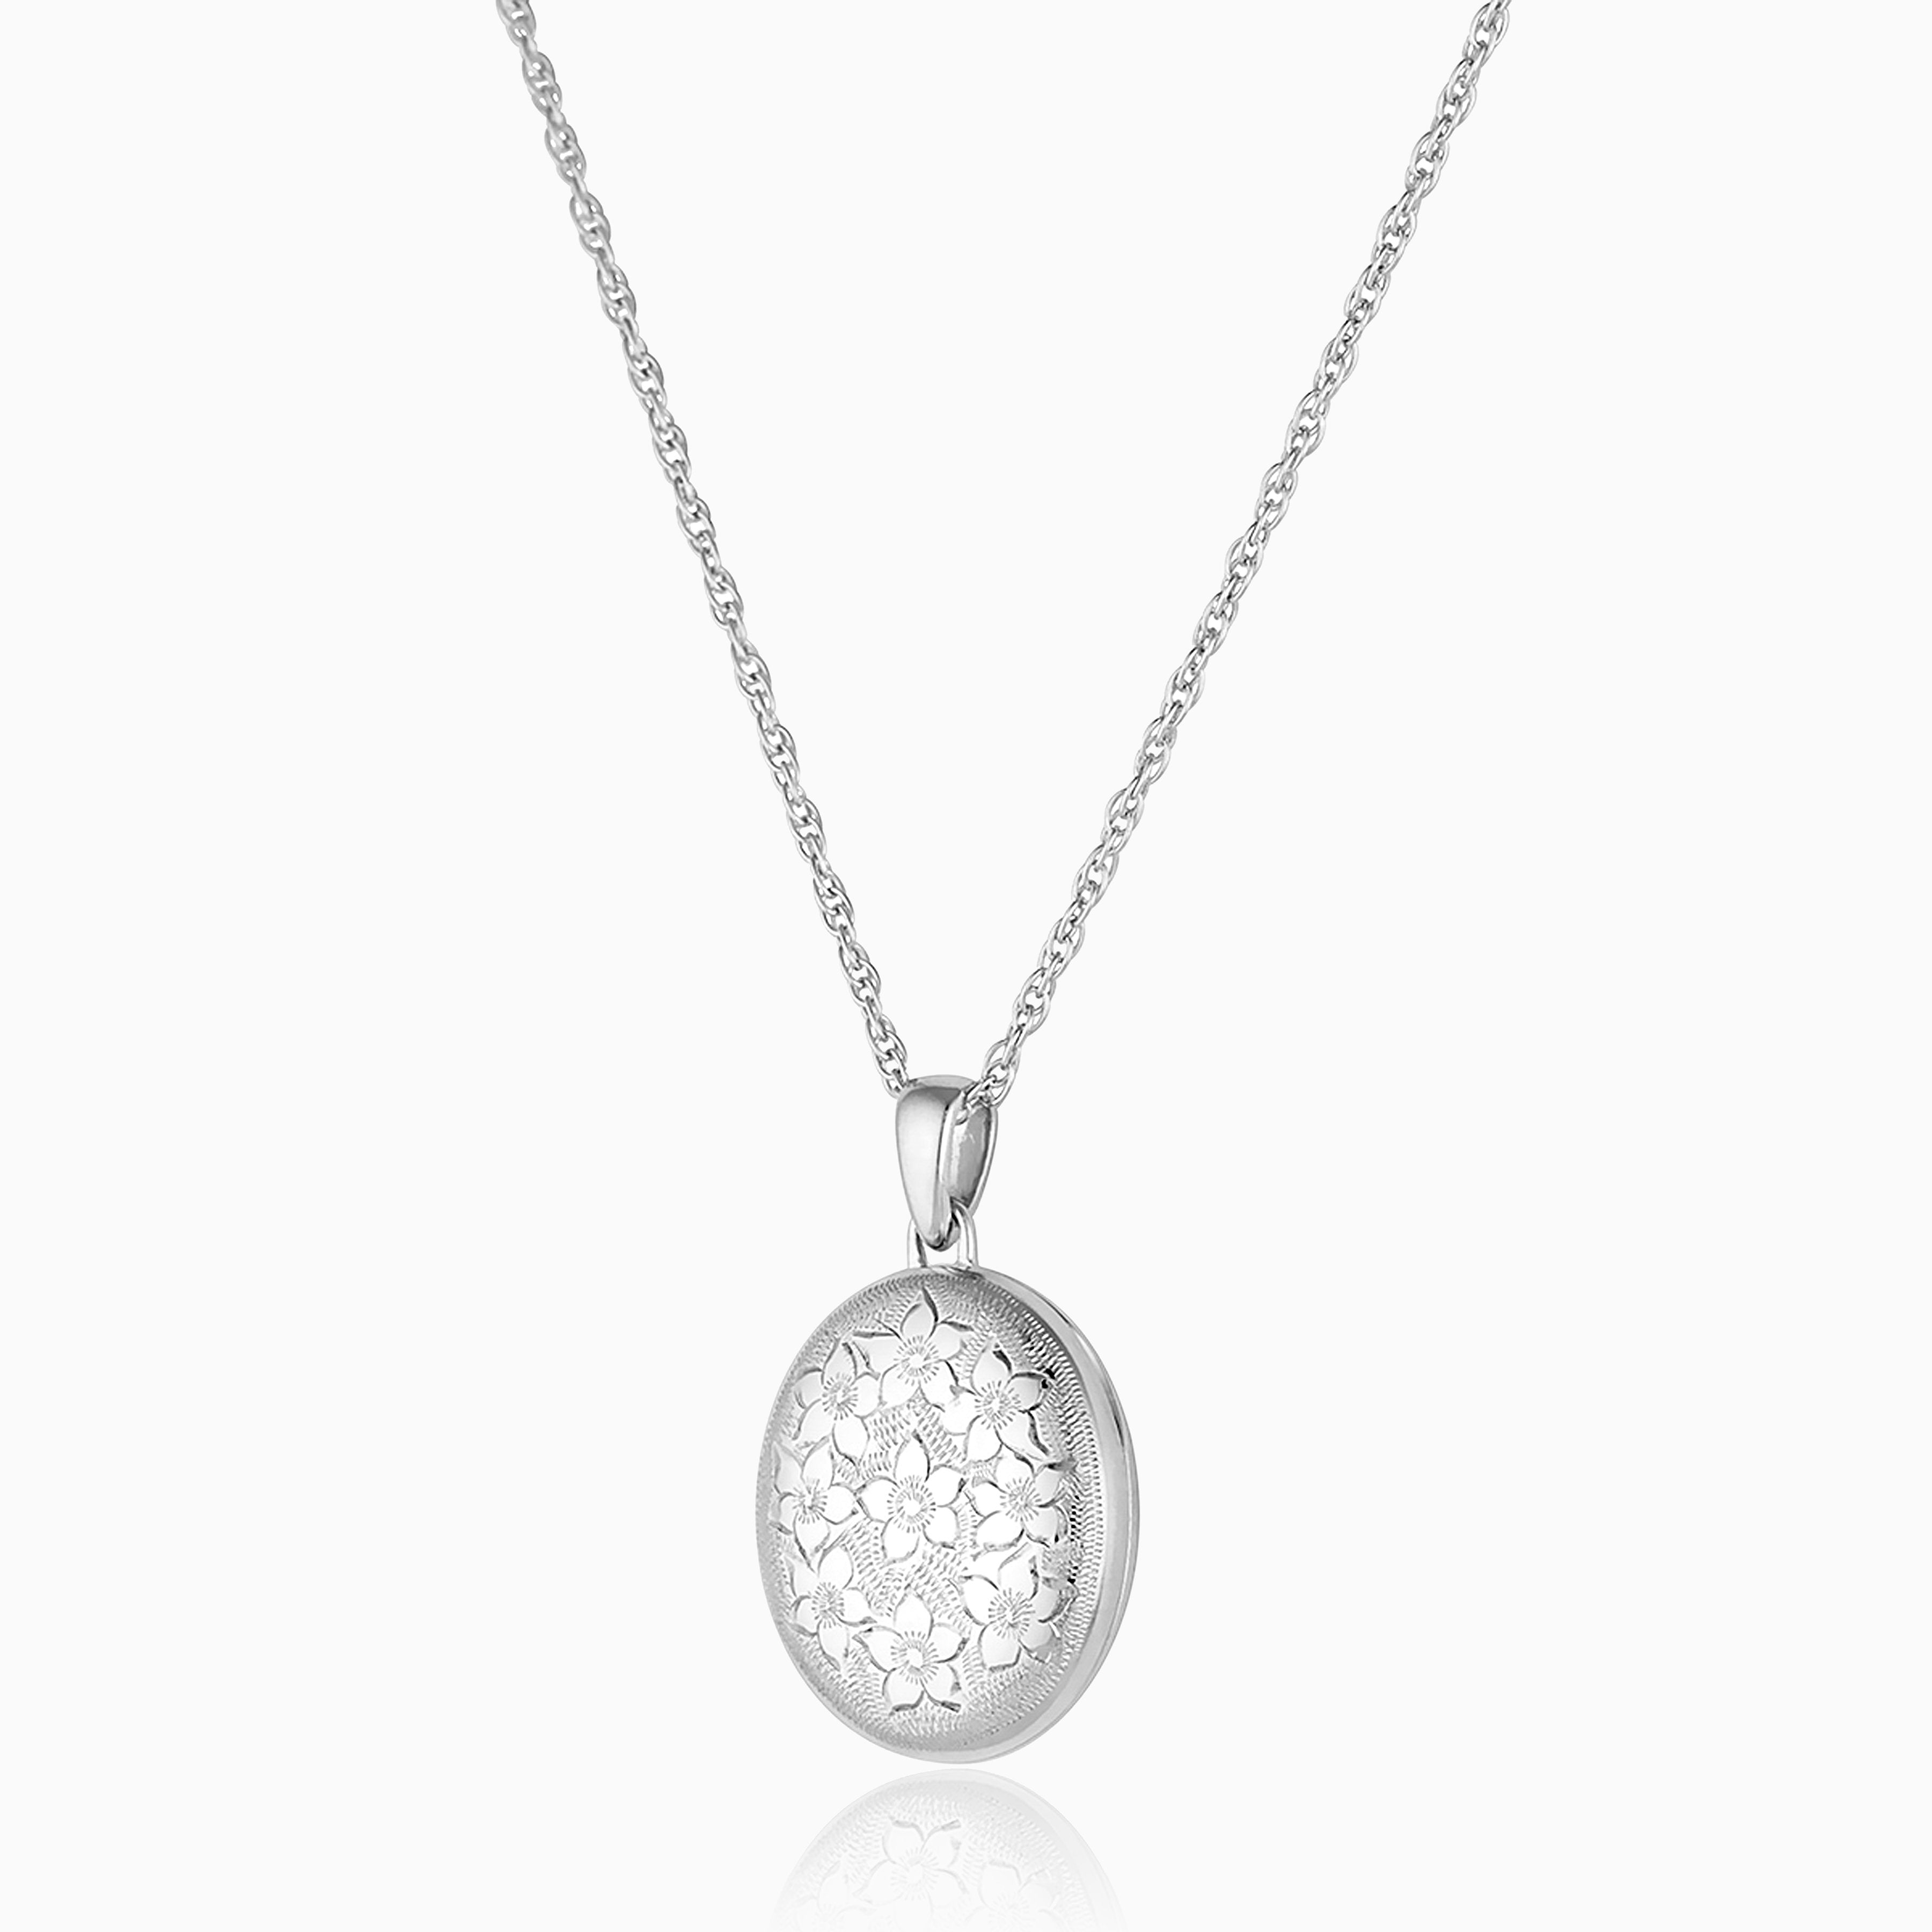 sterling silver oval locket engraved all over with a floral design, hanging on a sterling silver rope chain